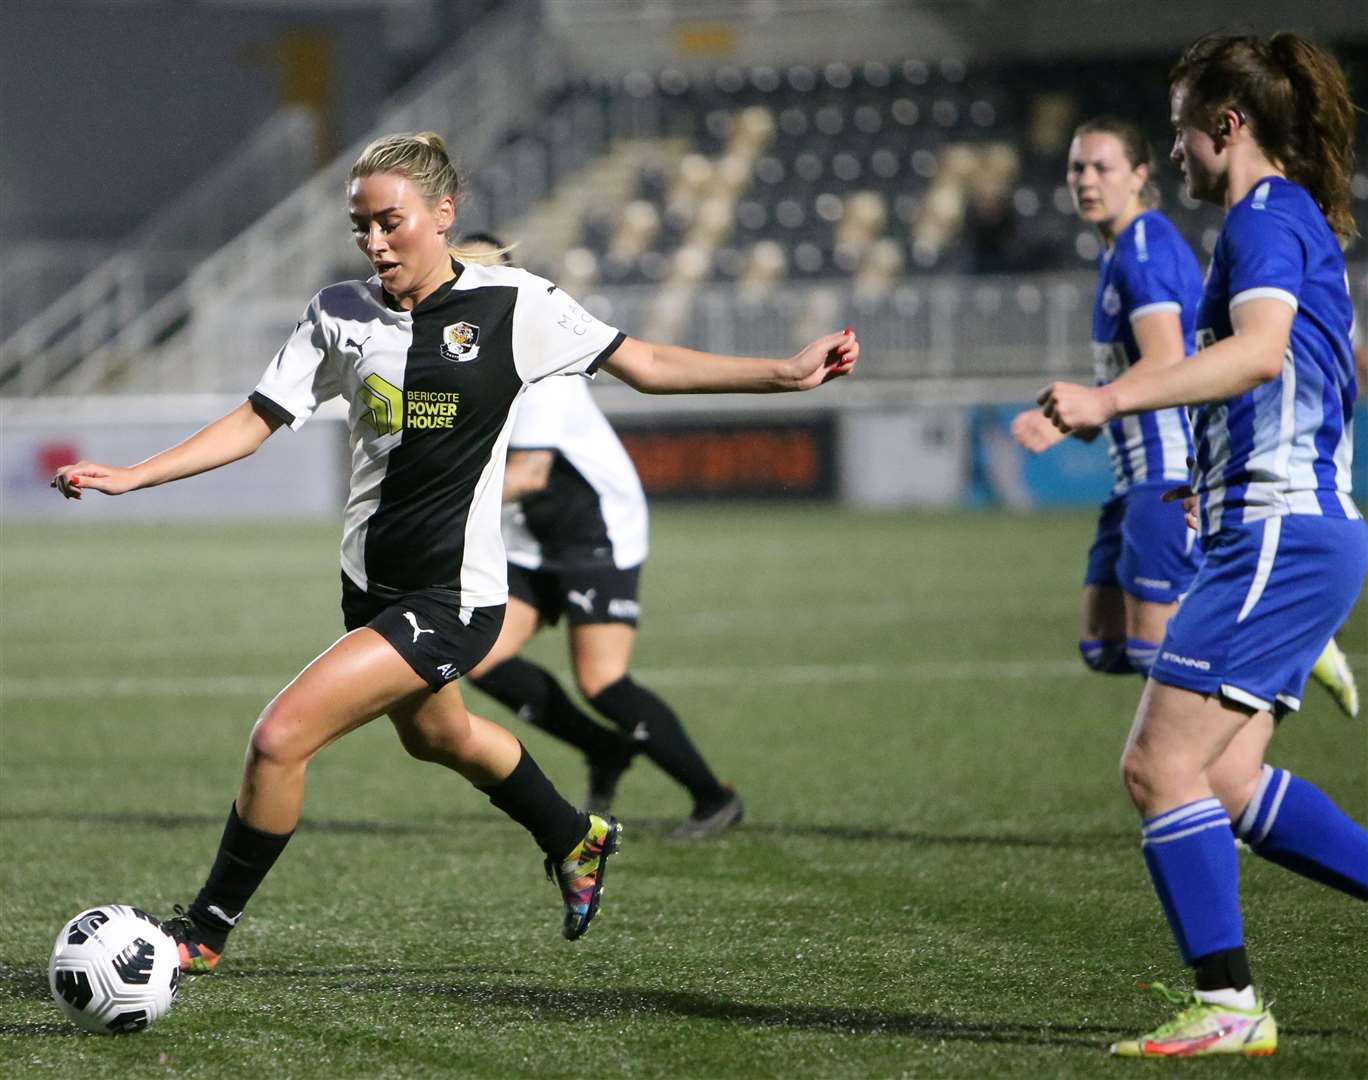 Dartford on the ball during the DFDS Kent Women's Cup Final against Aylesford. Picture: PSP Images